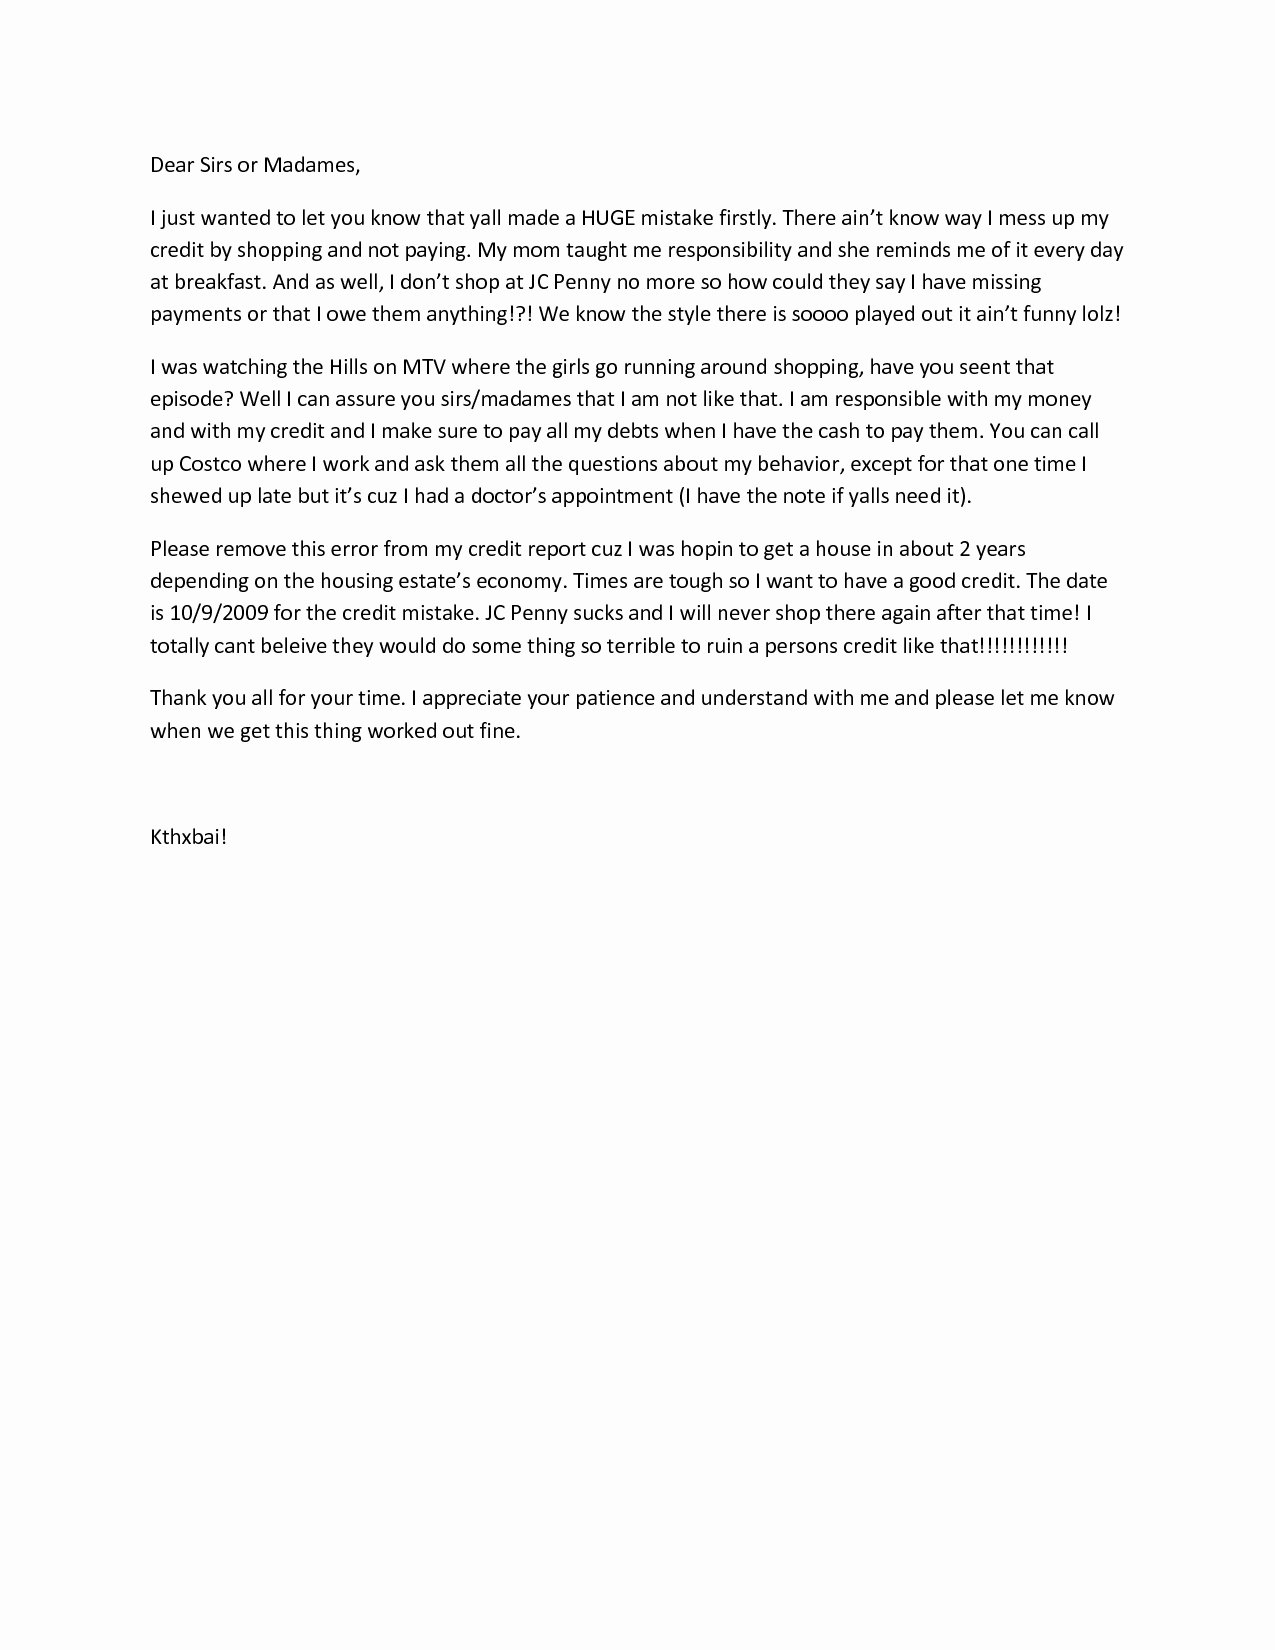 Sample Letter Of Explanation Beautiful Goodwill Letter Template to Remove Paid Collections